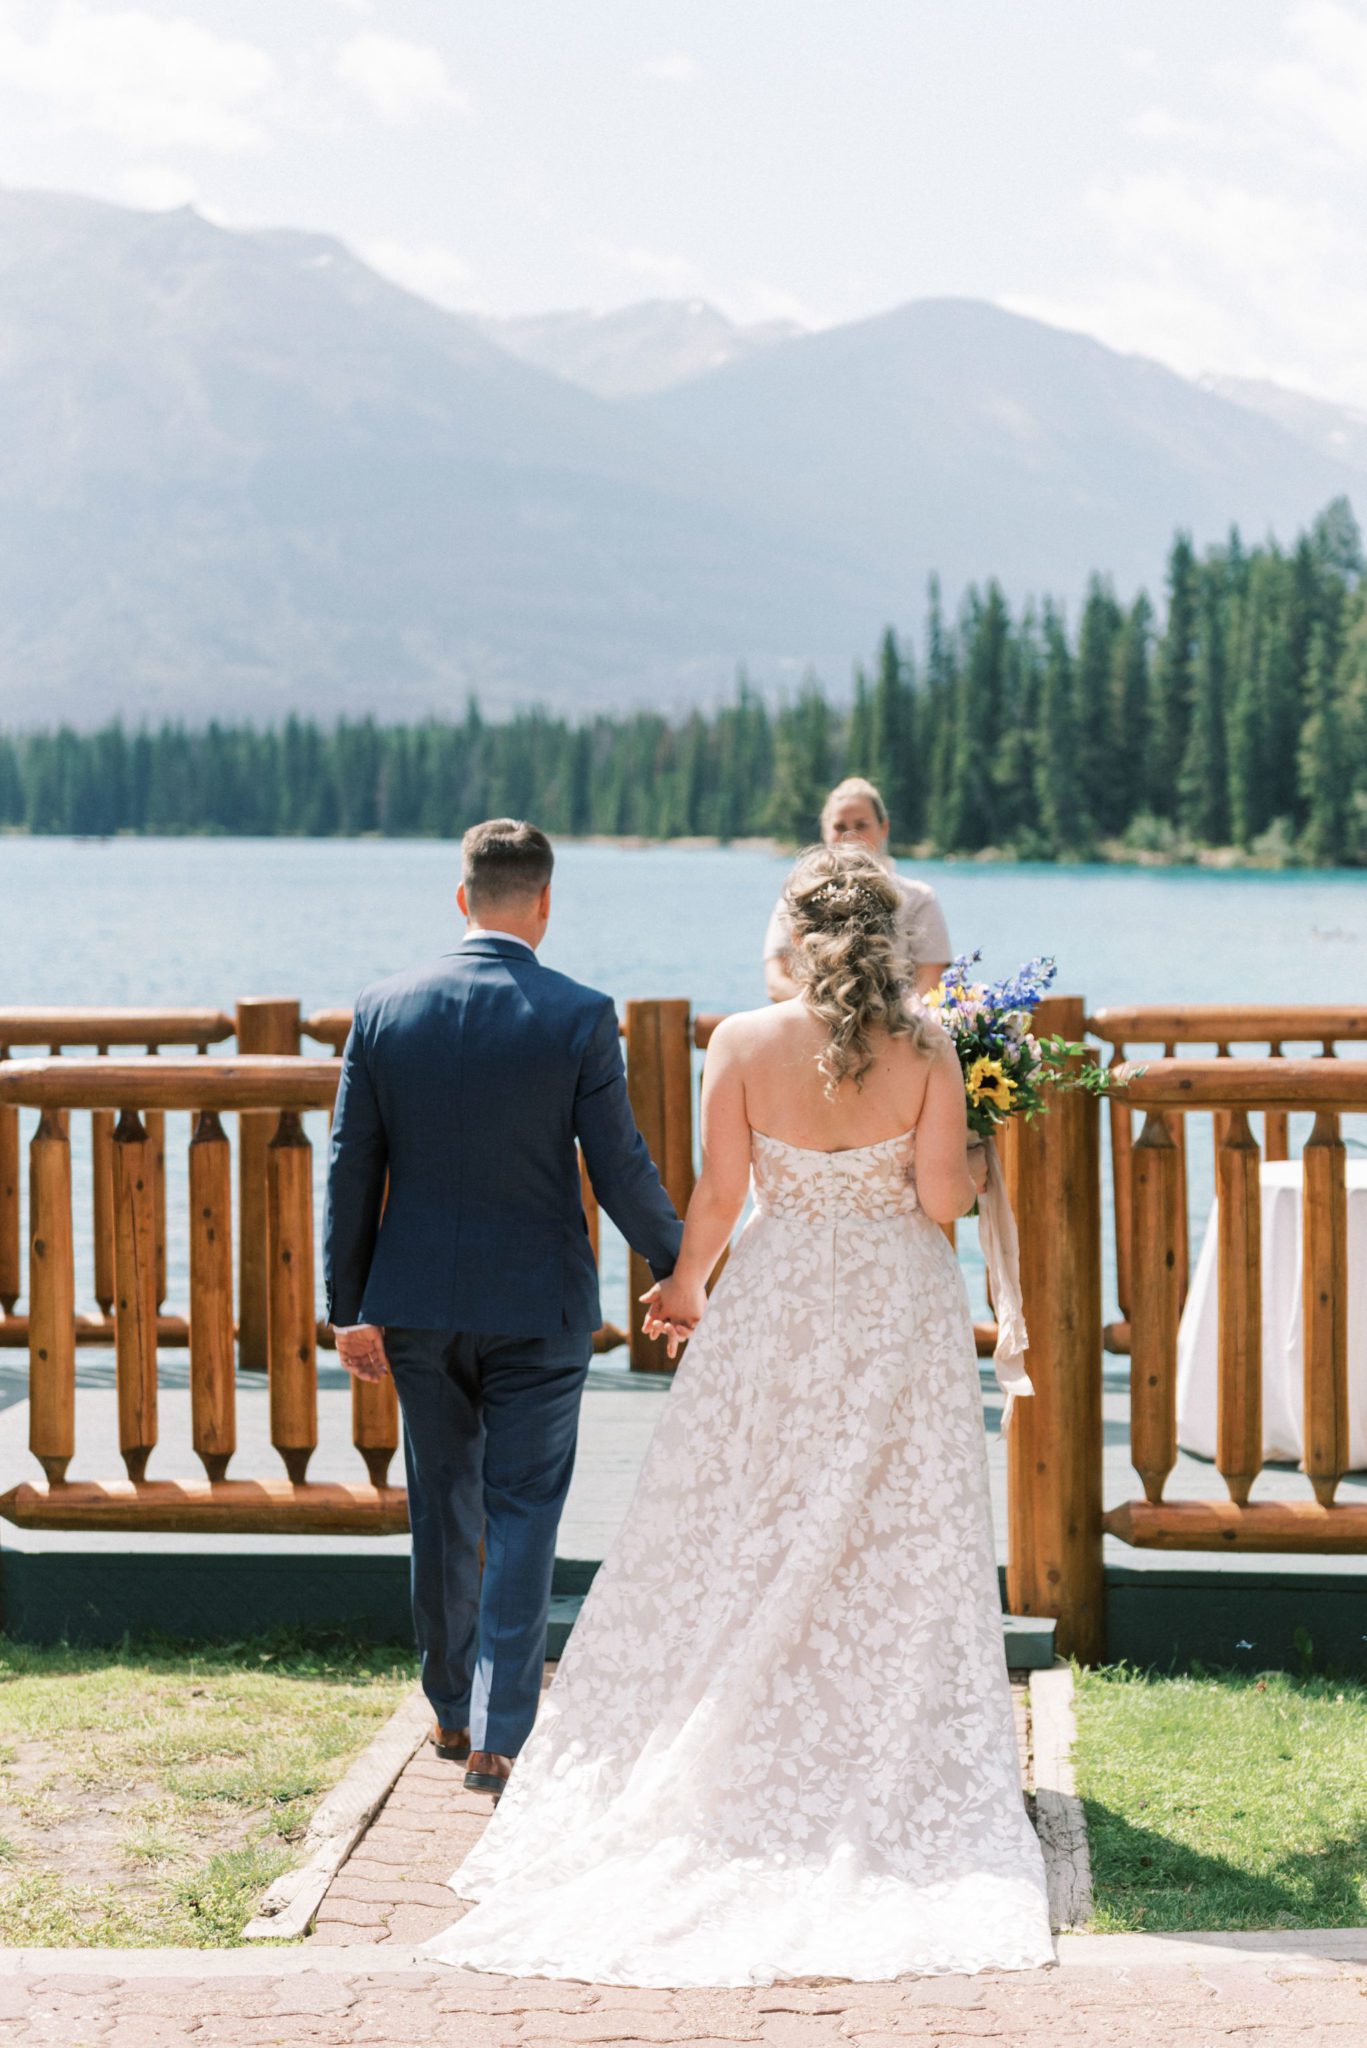 Getting Ready Together Never Looked So Good! An Intimate Mountain Elopement at the Fairmont Jasper Park Lodge Featured by Brontë Bride